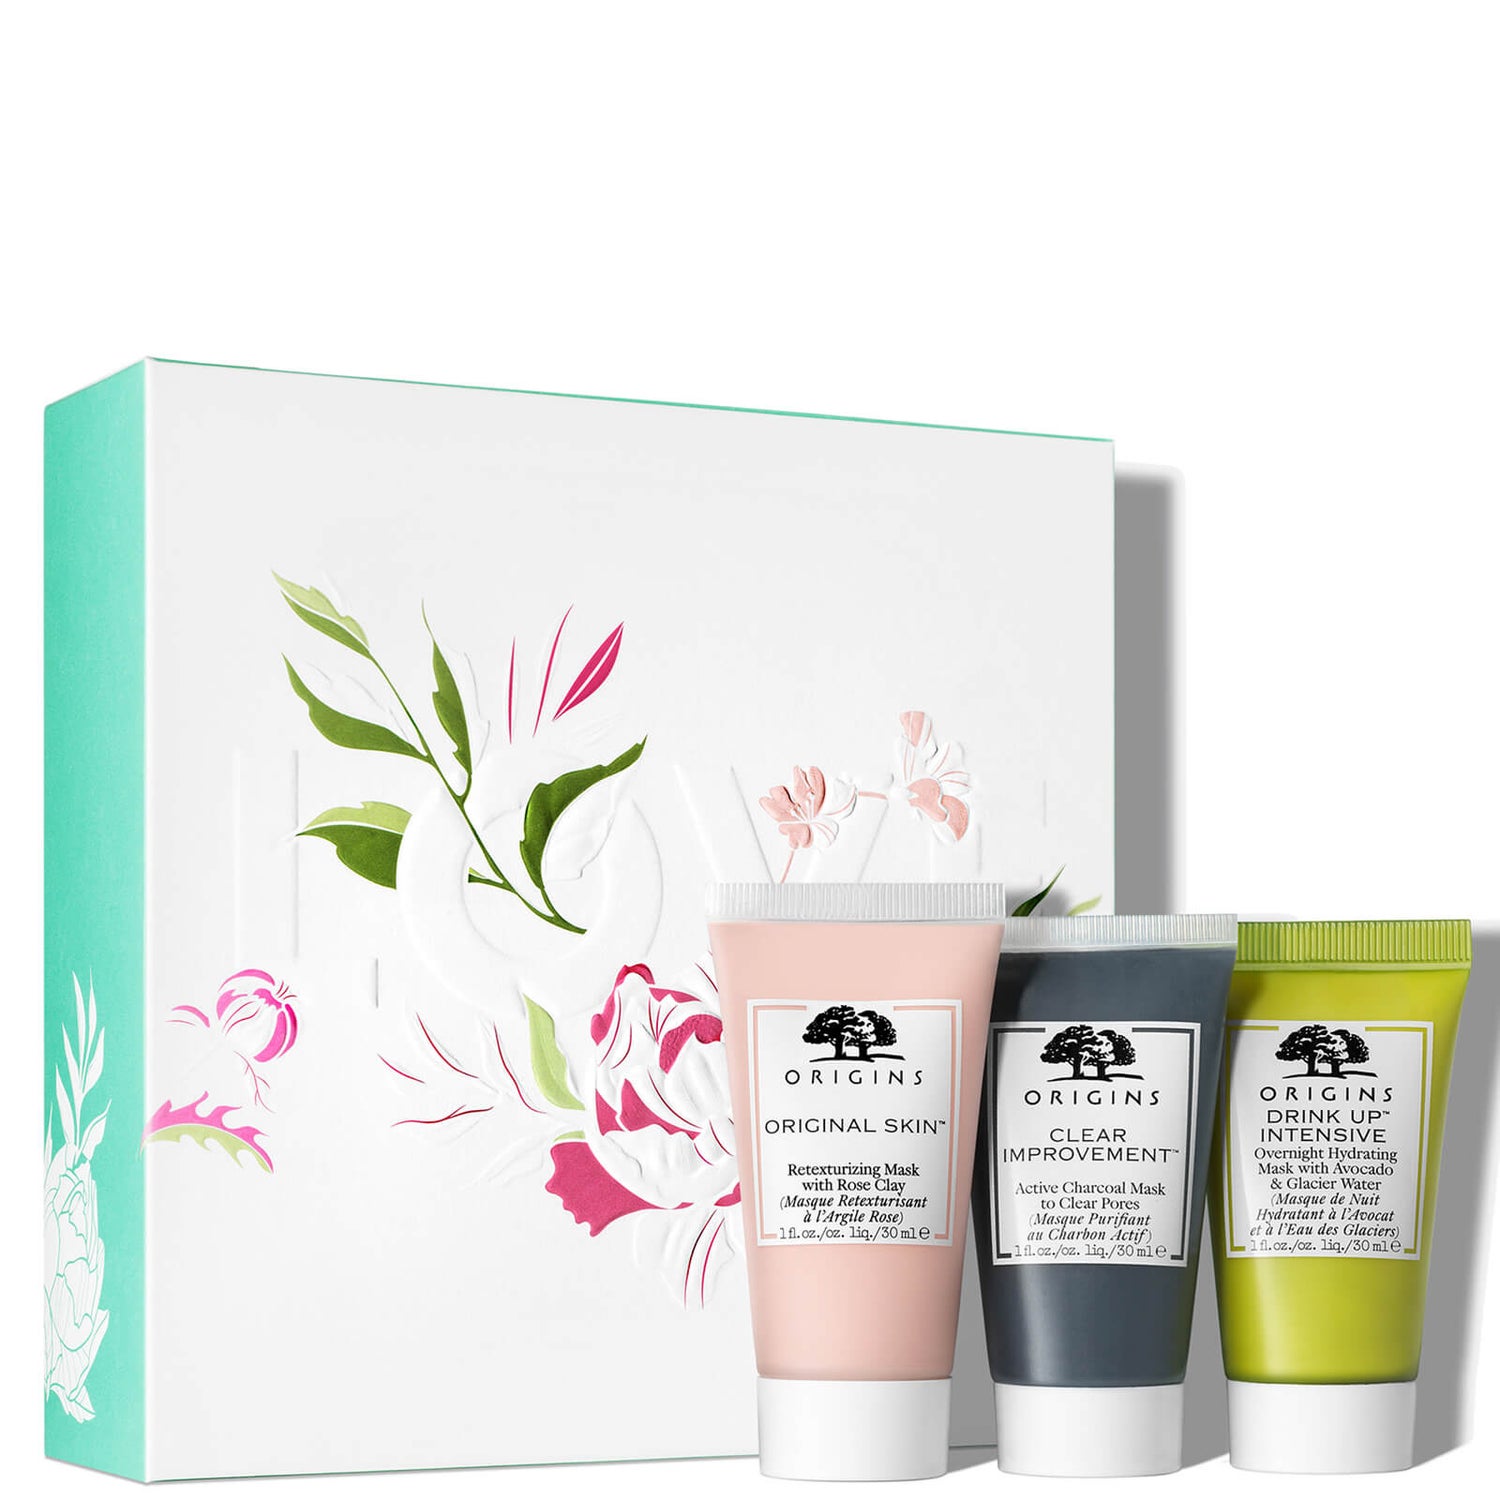 Origins LOVE AND MASK Masking Trio to Retexturize, Purify and Hydrate (Worth £39.00)